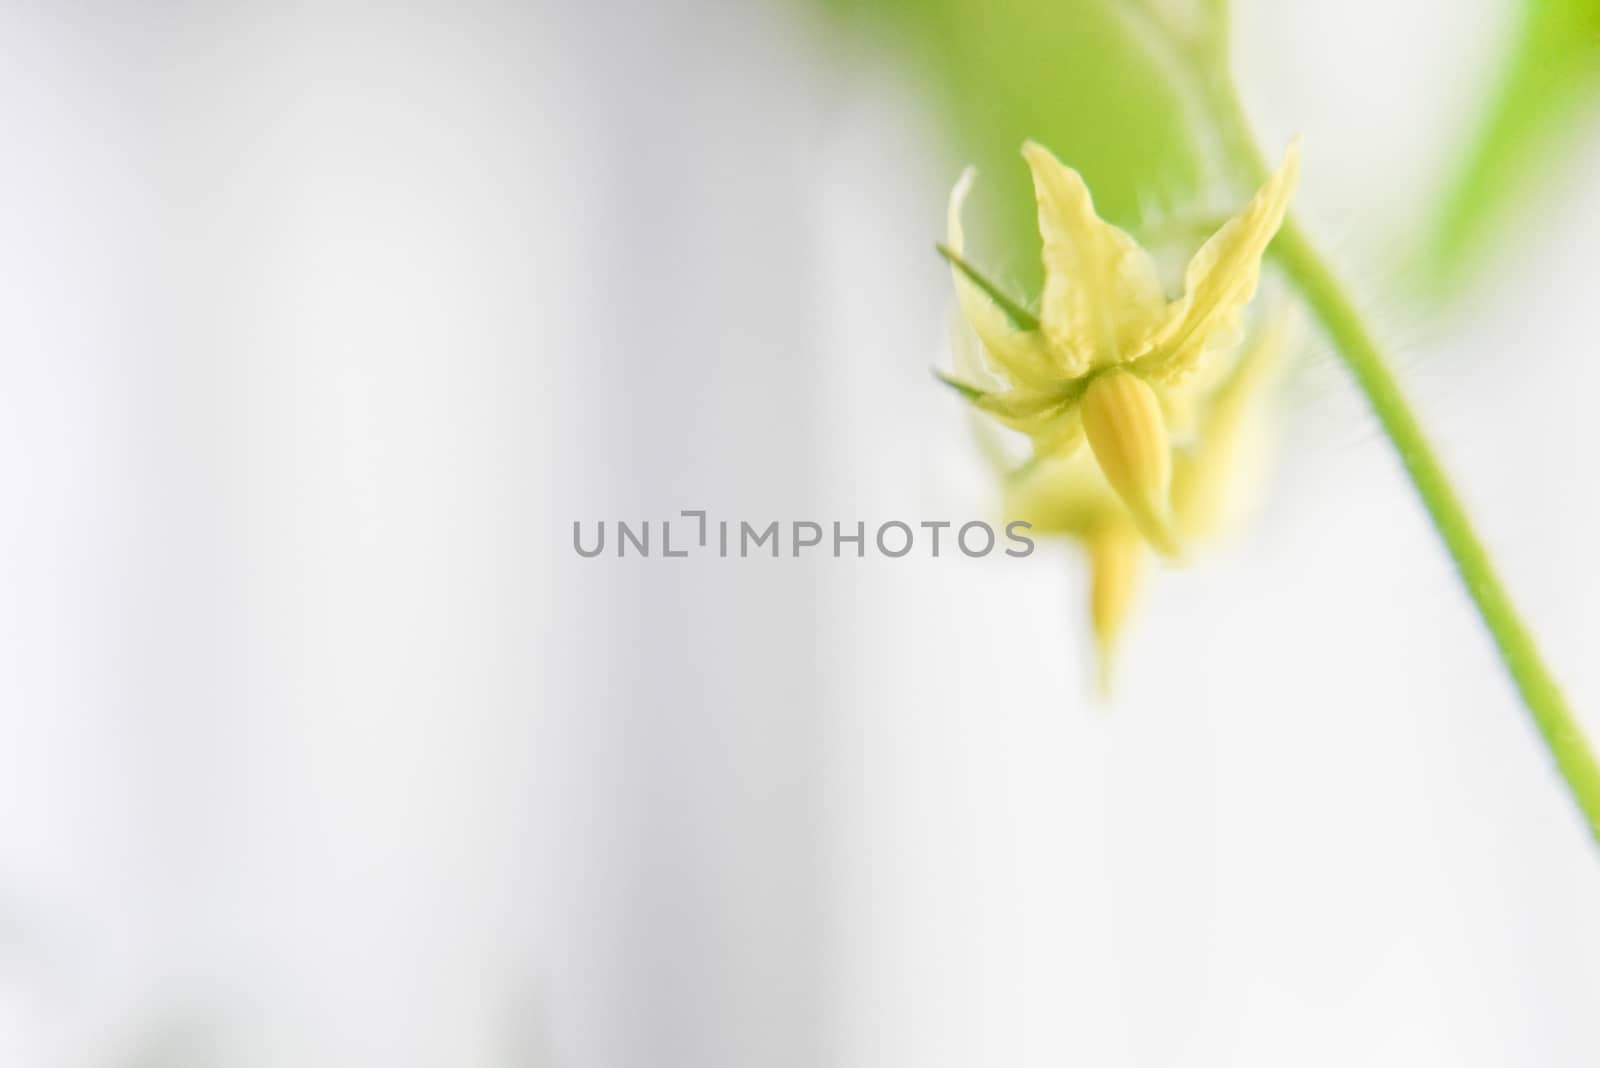 blurry focus on yellow tomato flower. spring concept